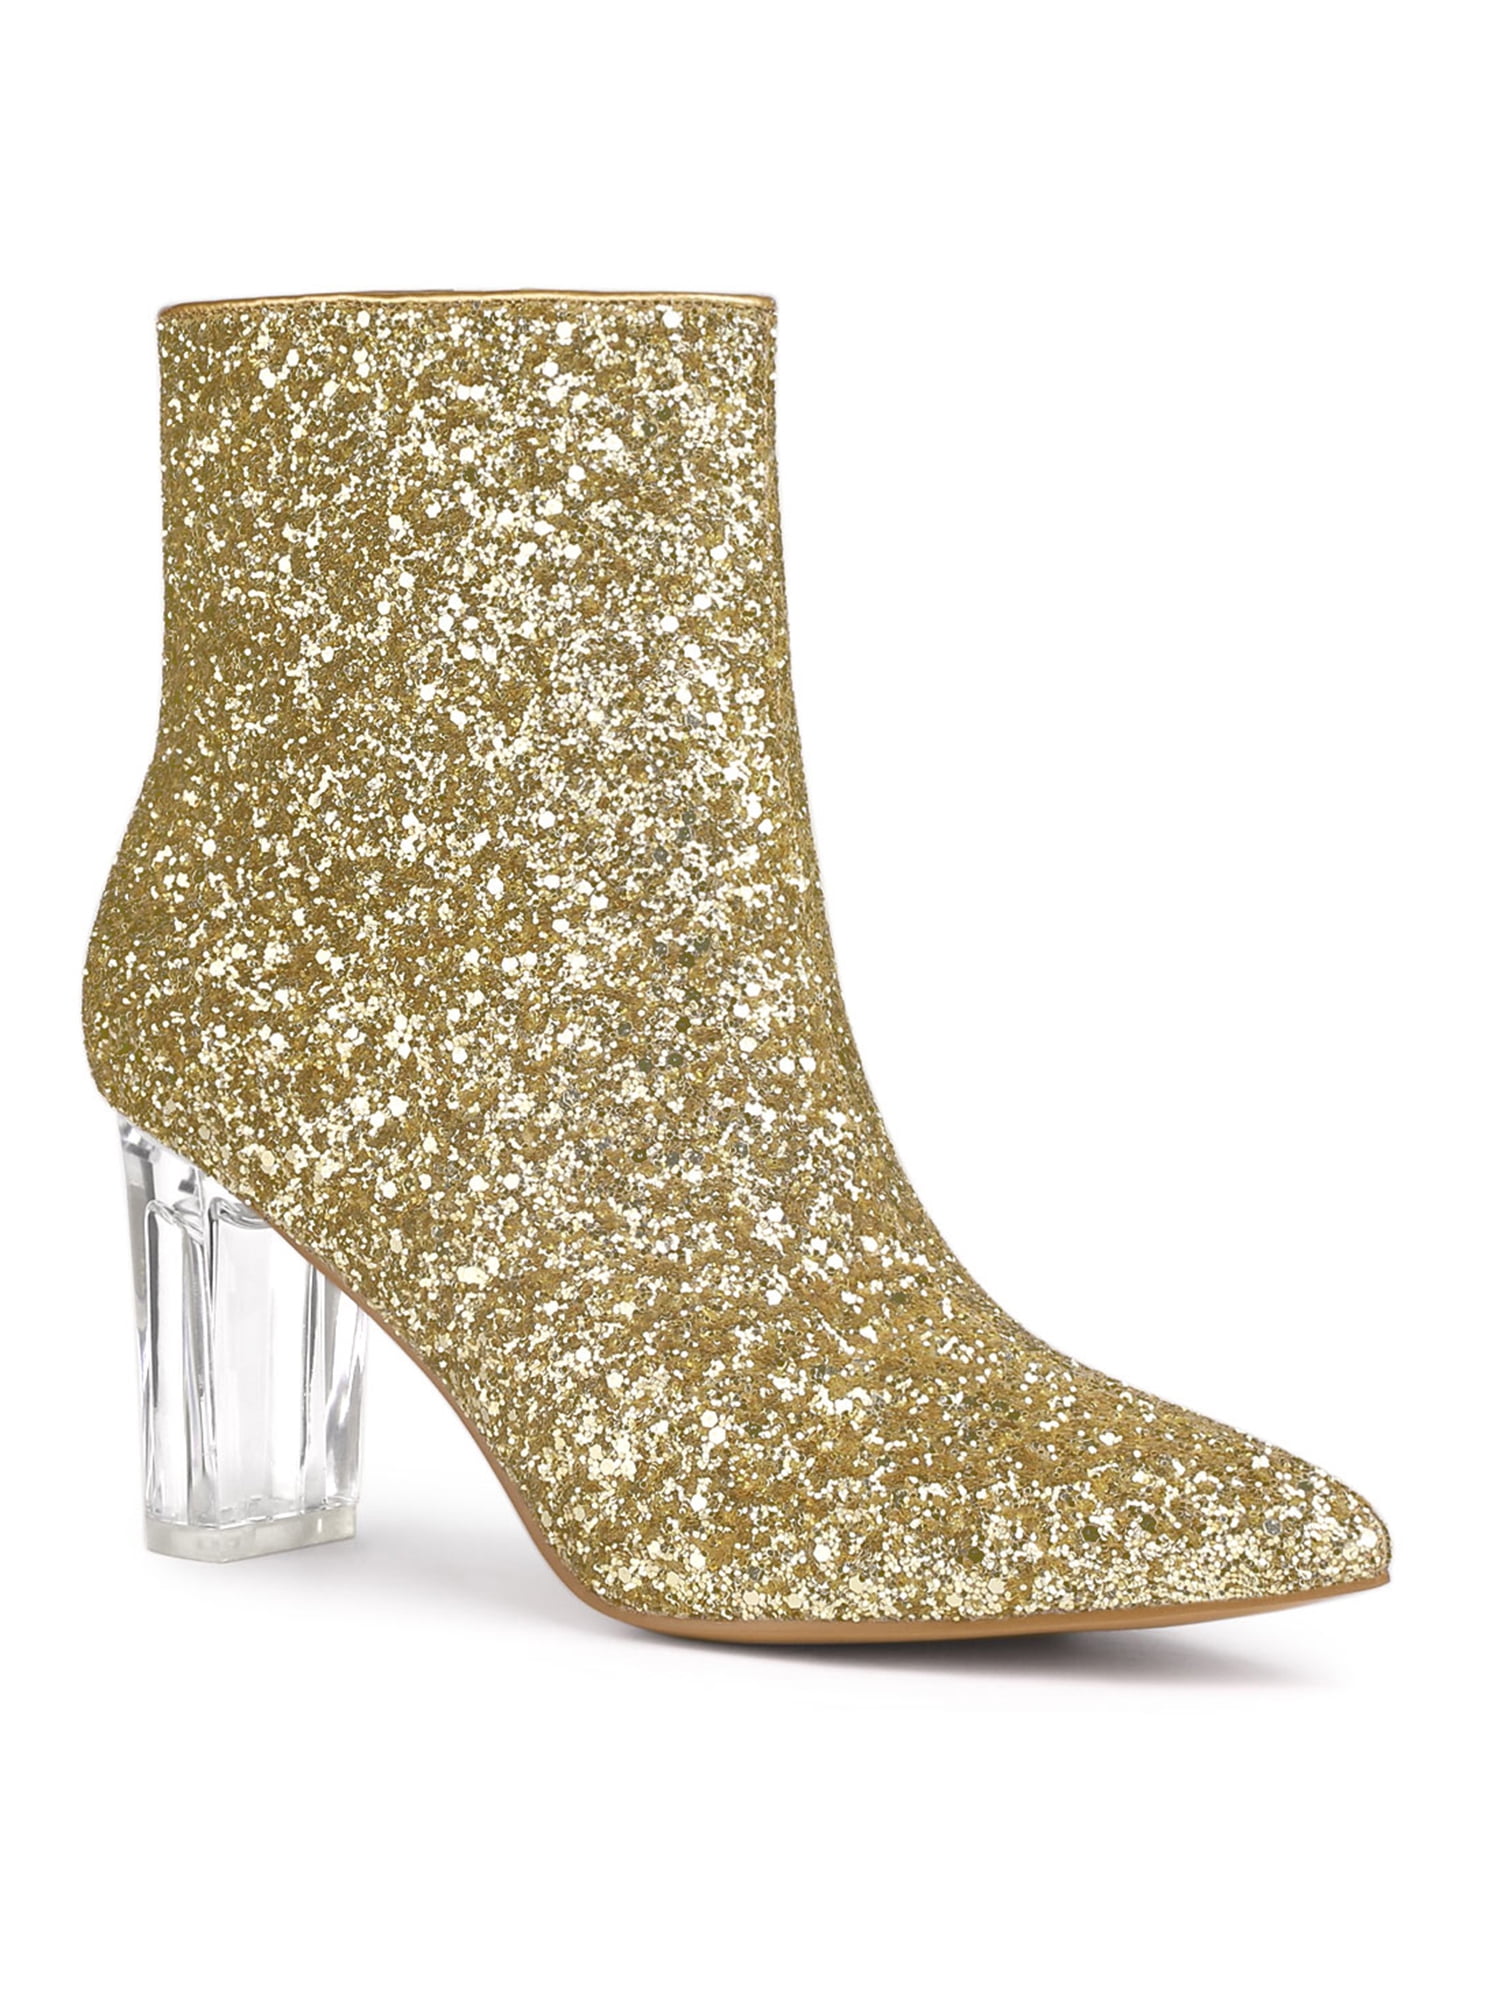 gold glitter ankle booties